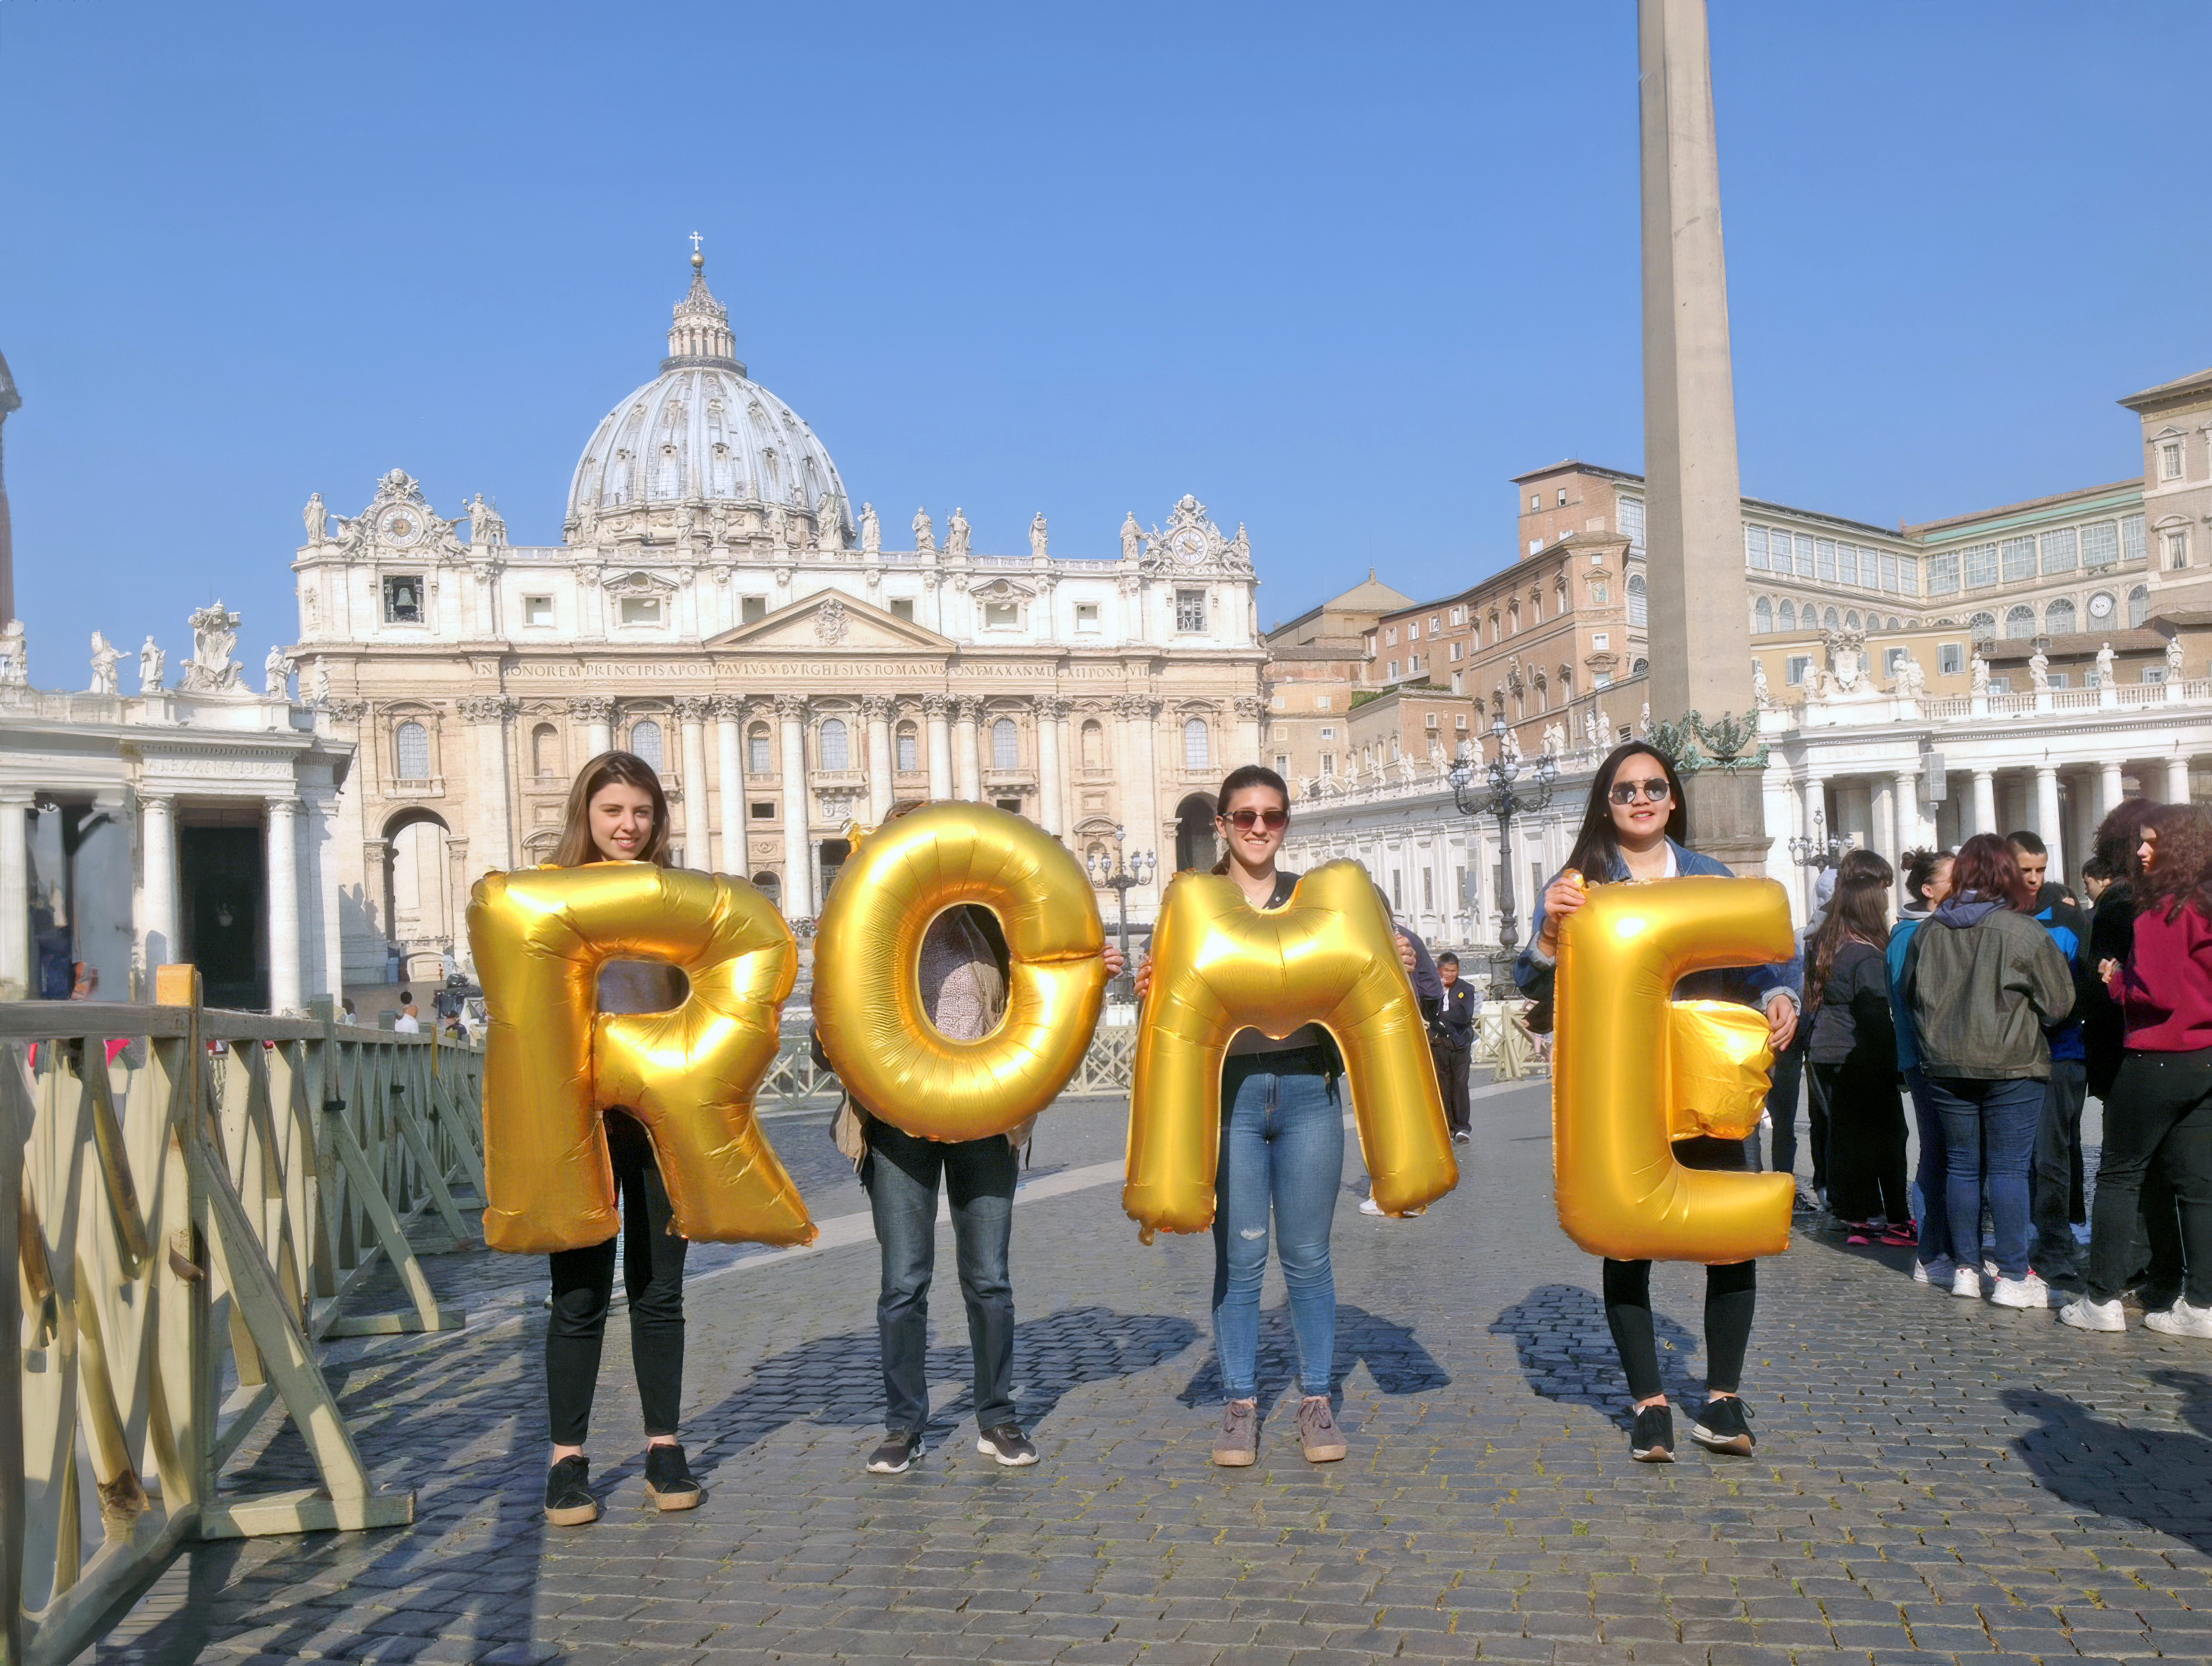 Holy See, Vatican City, Saint Peter's Square - Rome, Silence was Golden, gold balloons